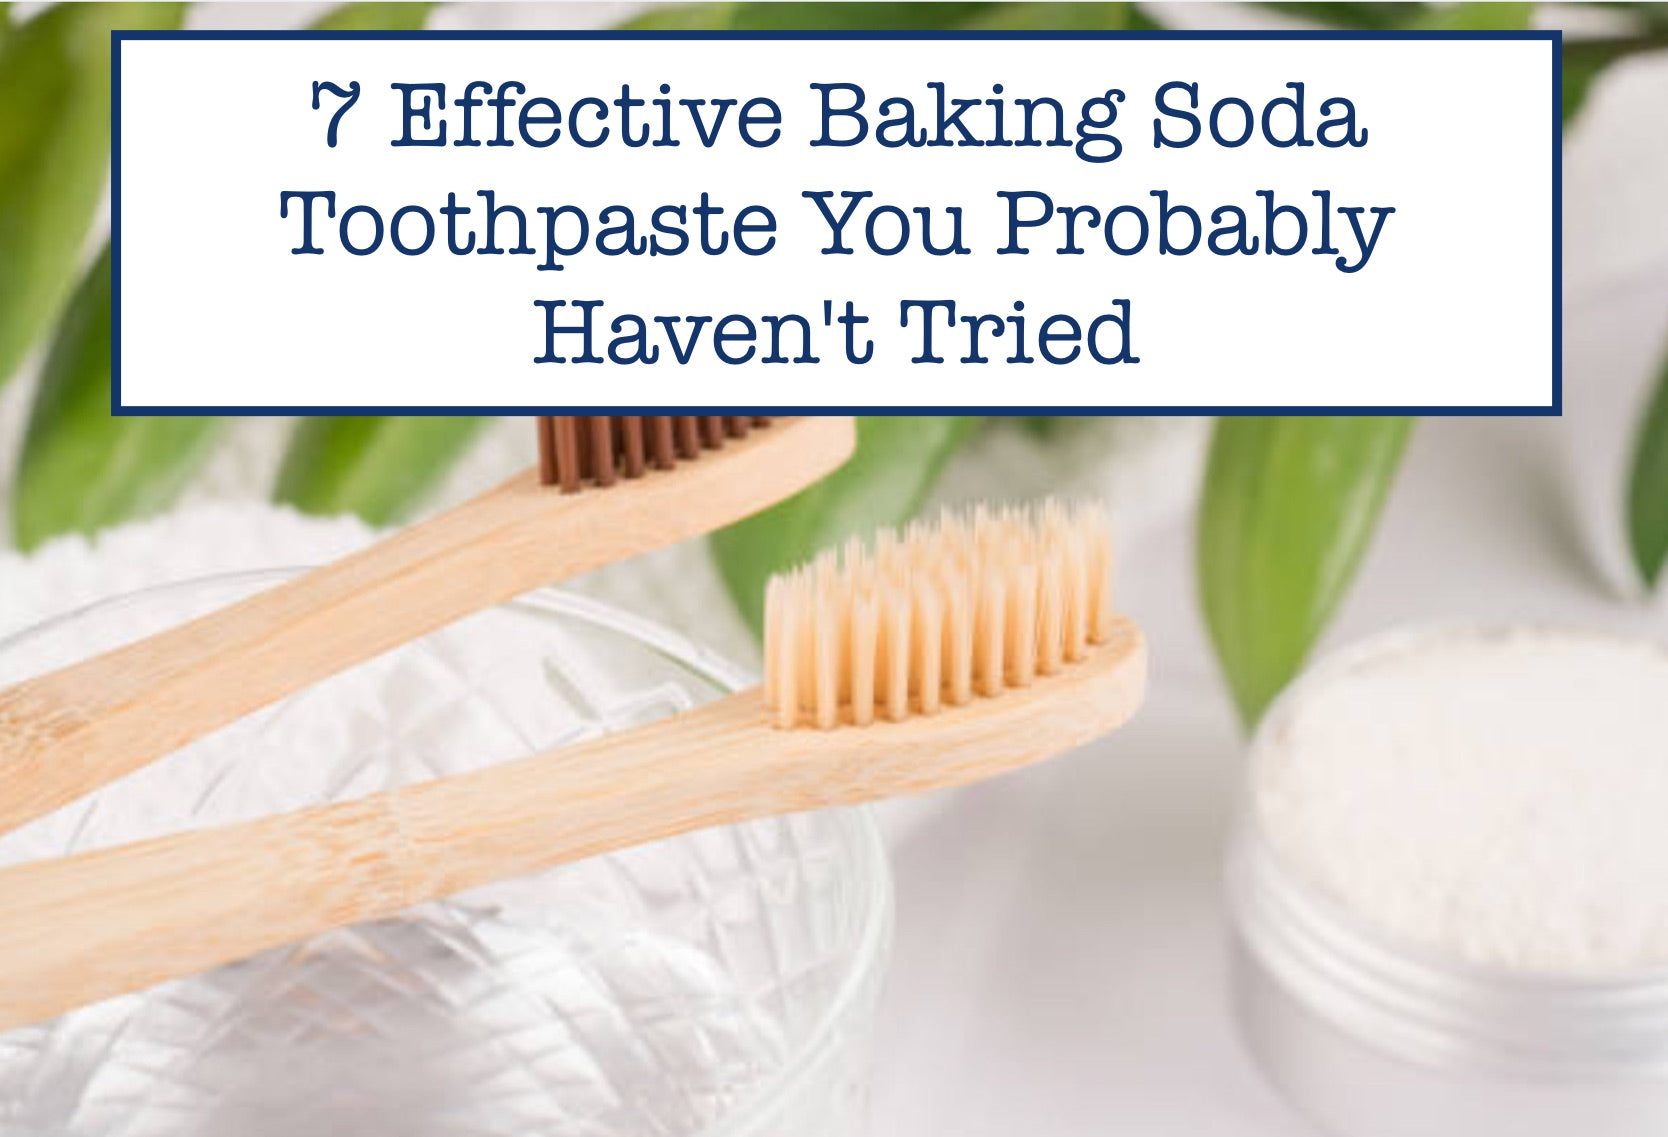 7 Effective Baking Soda Toothpaste You Probably Haven't Tried